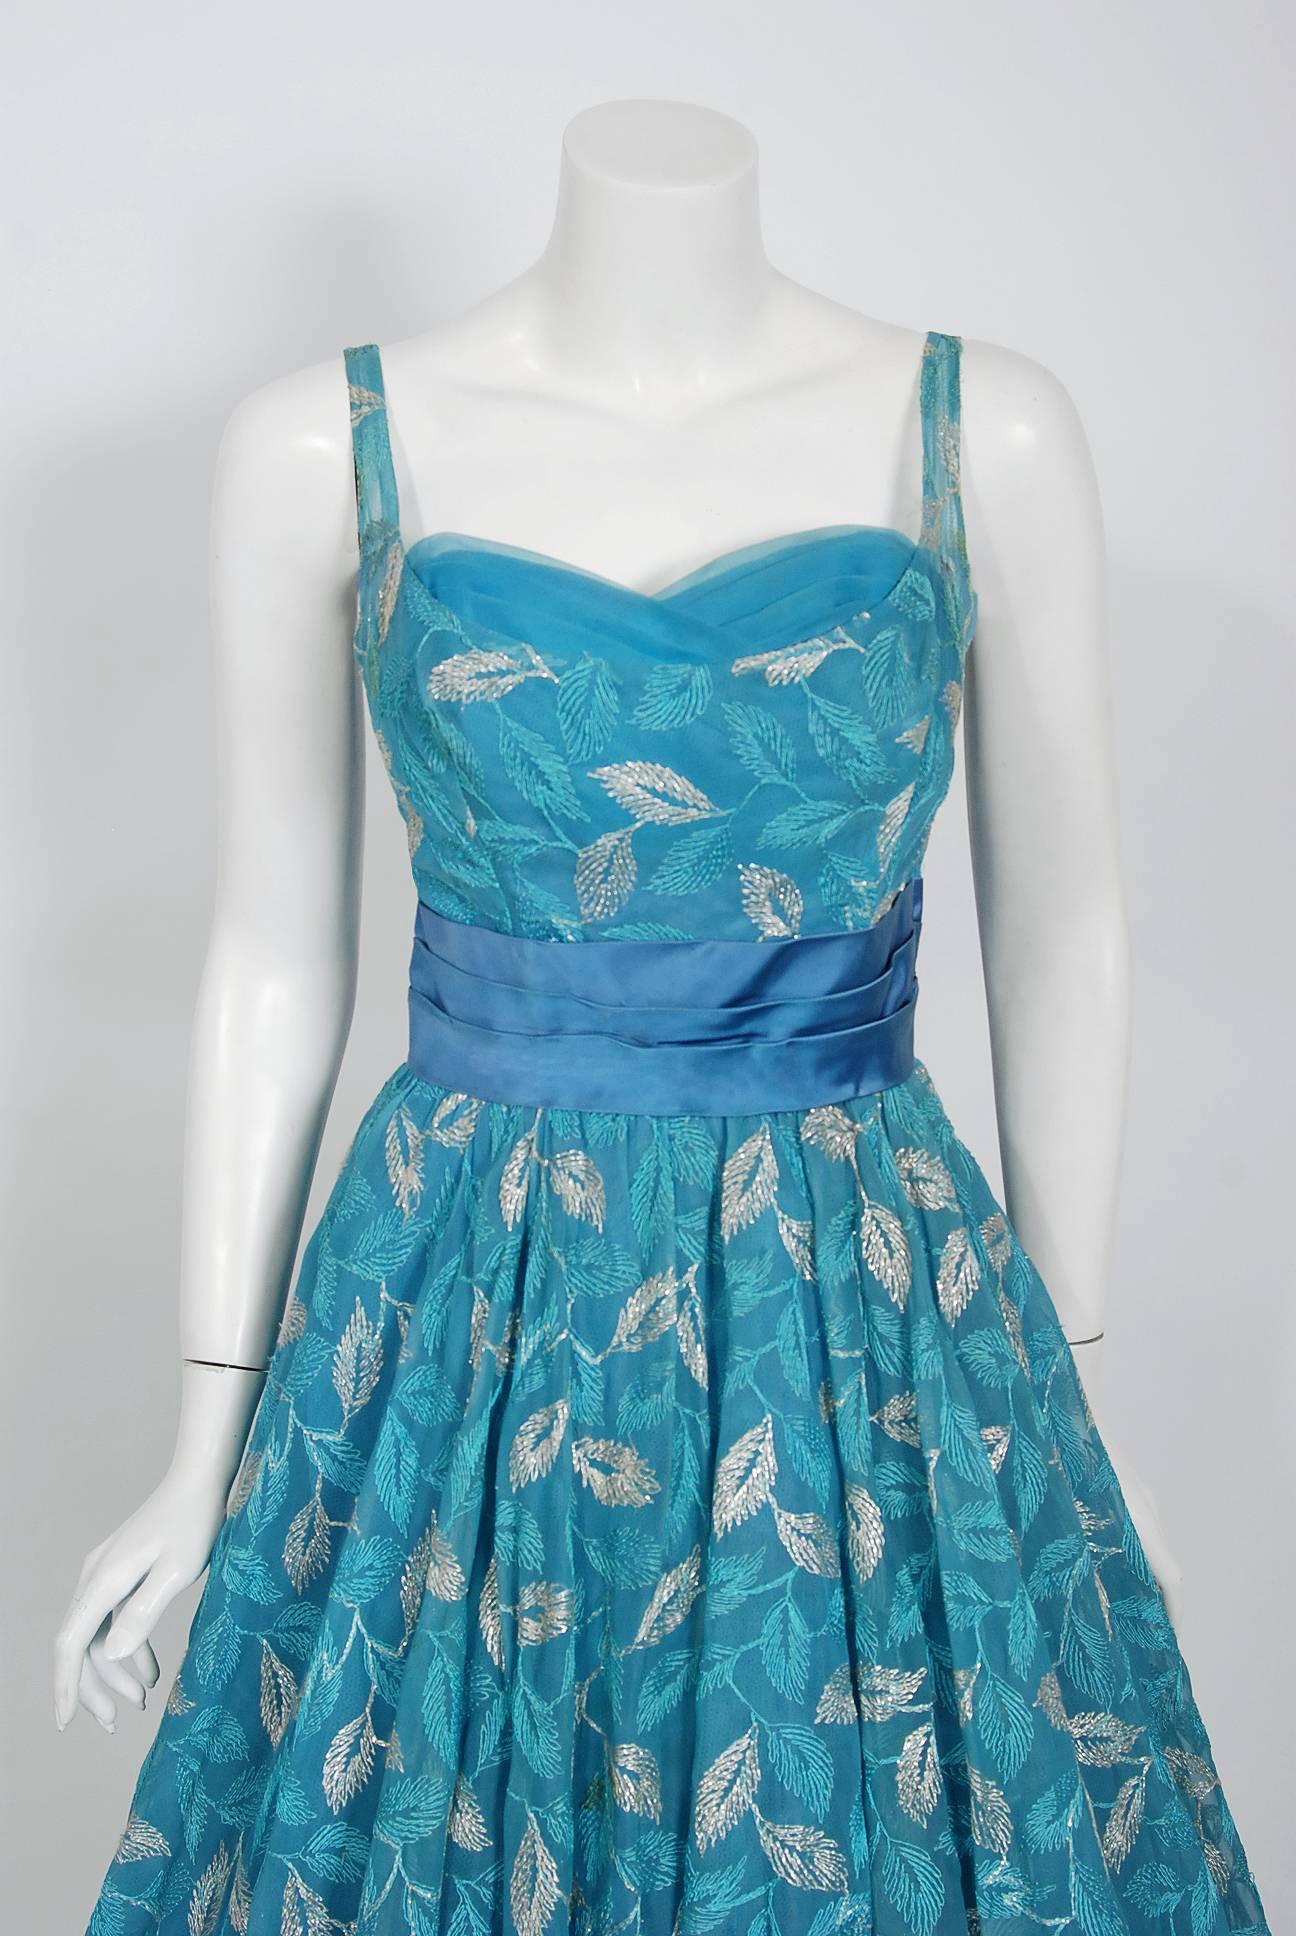 Fashioned from metallic leaf-motif embroidered teal blue chiffon, this 1950's Will Steinman creation has everything a woman wants. The bodice has a gorgeous sweetheart tulle-trimmed plunge. I adore the hourglass cummerbund sash waist which flows